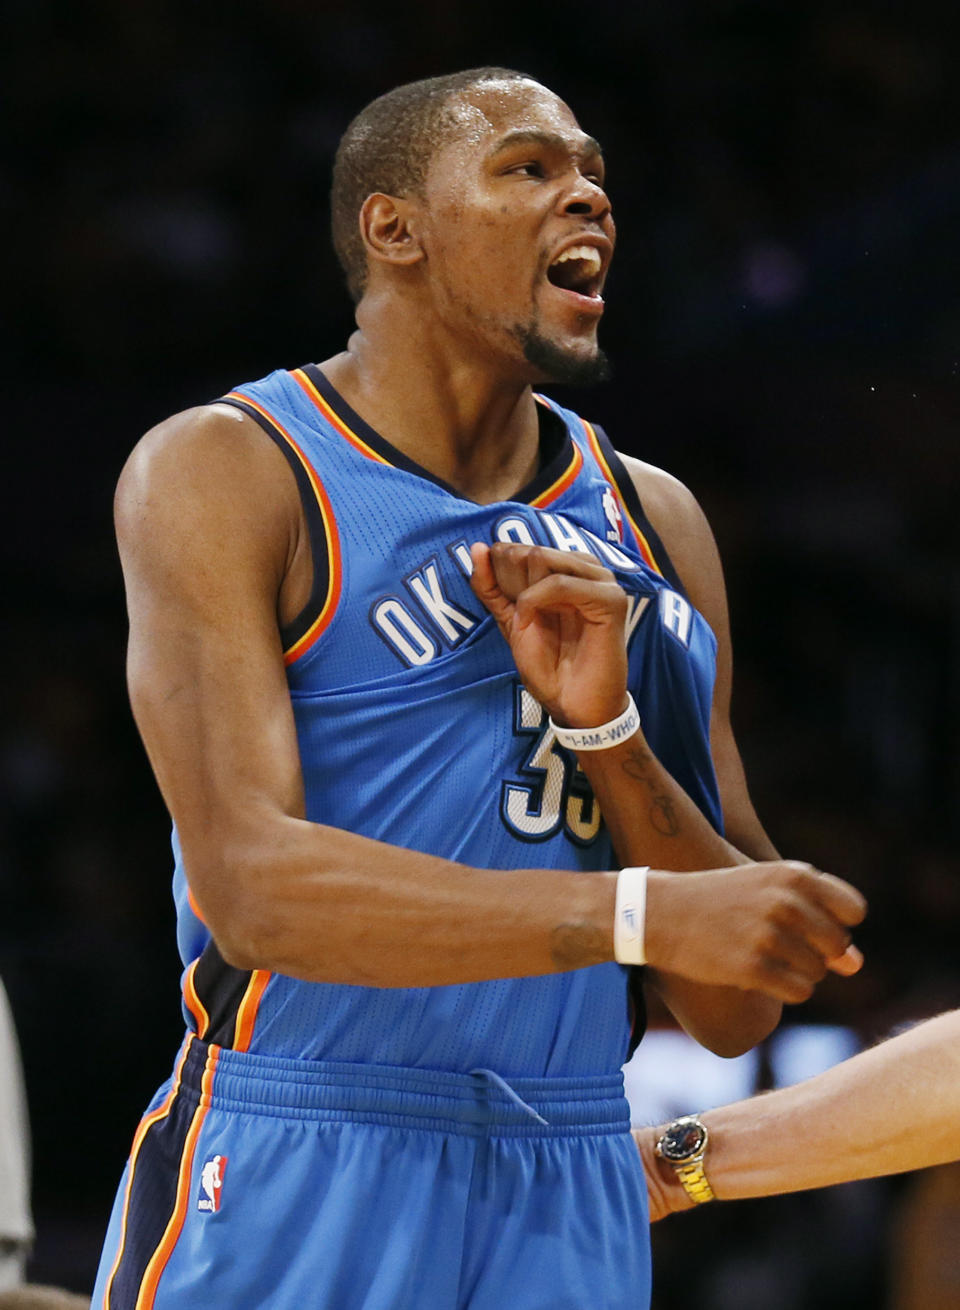 Oklahoma City Thunder small forward Kevin Durant reacts to being called for a foul against the Los Angeles Lakers during the first half of an NBA basketball game in Los Angeles, Sunday, March 9, 2014. (AP Photo/Danny Moloshok)